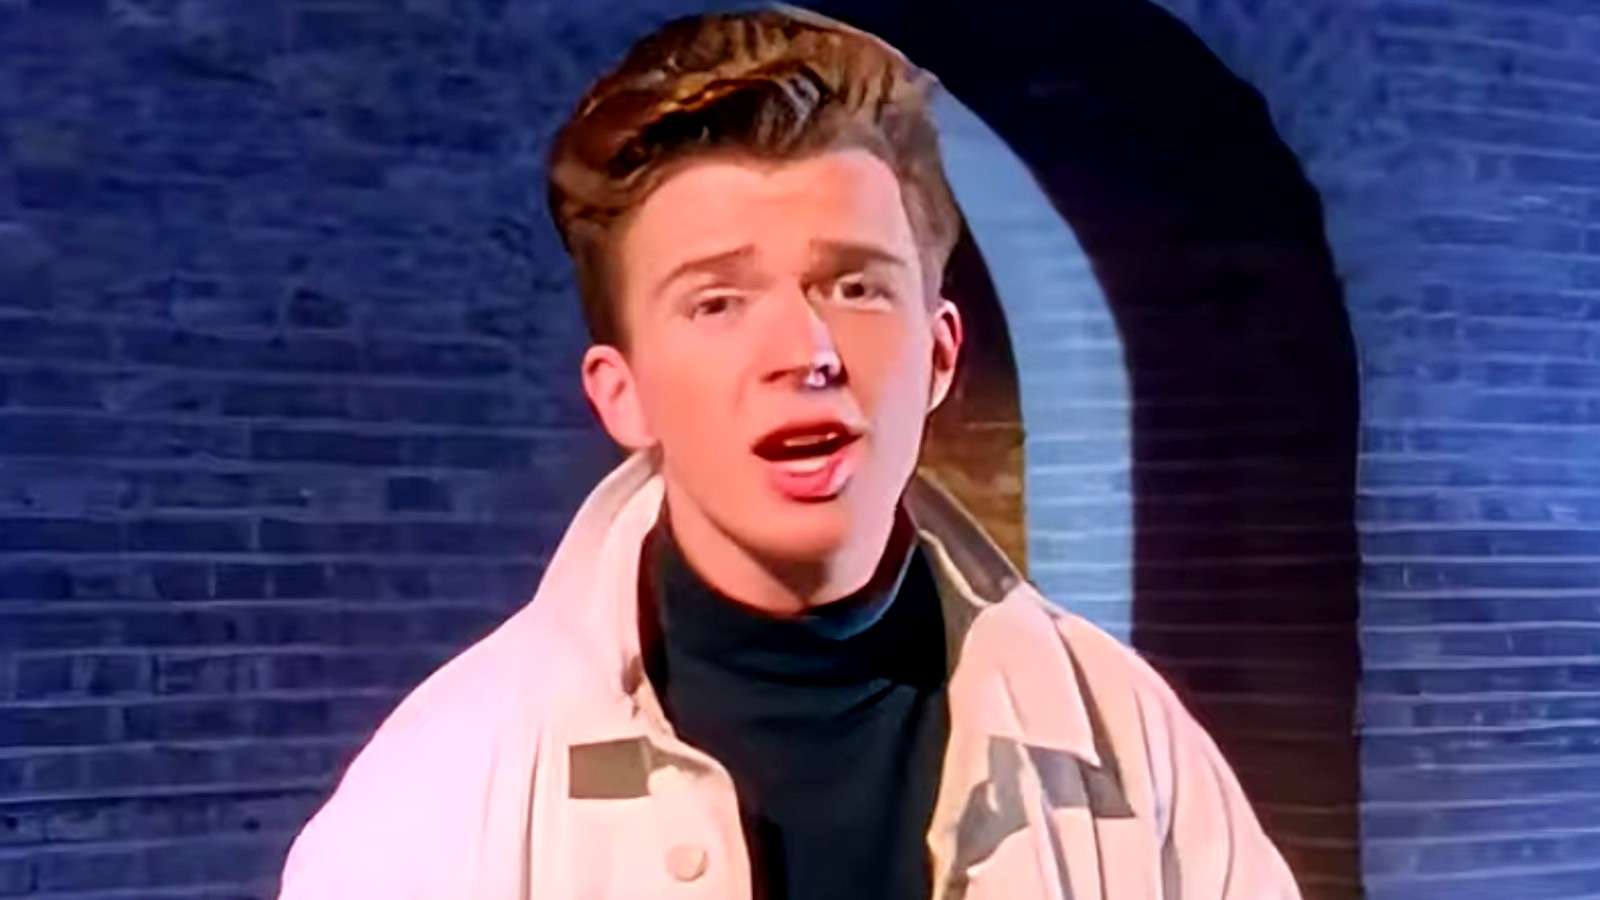 Rick Astley in the music video for Never Gonna Give You Up